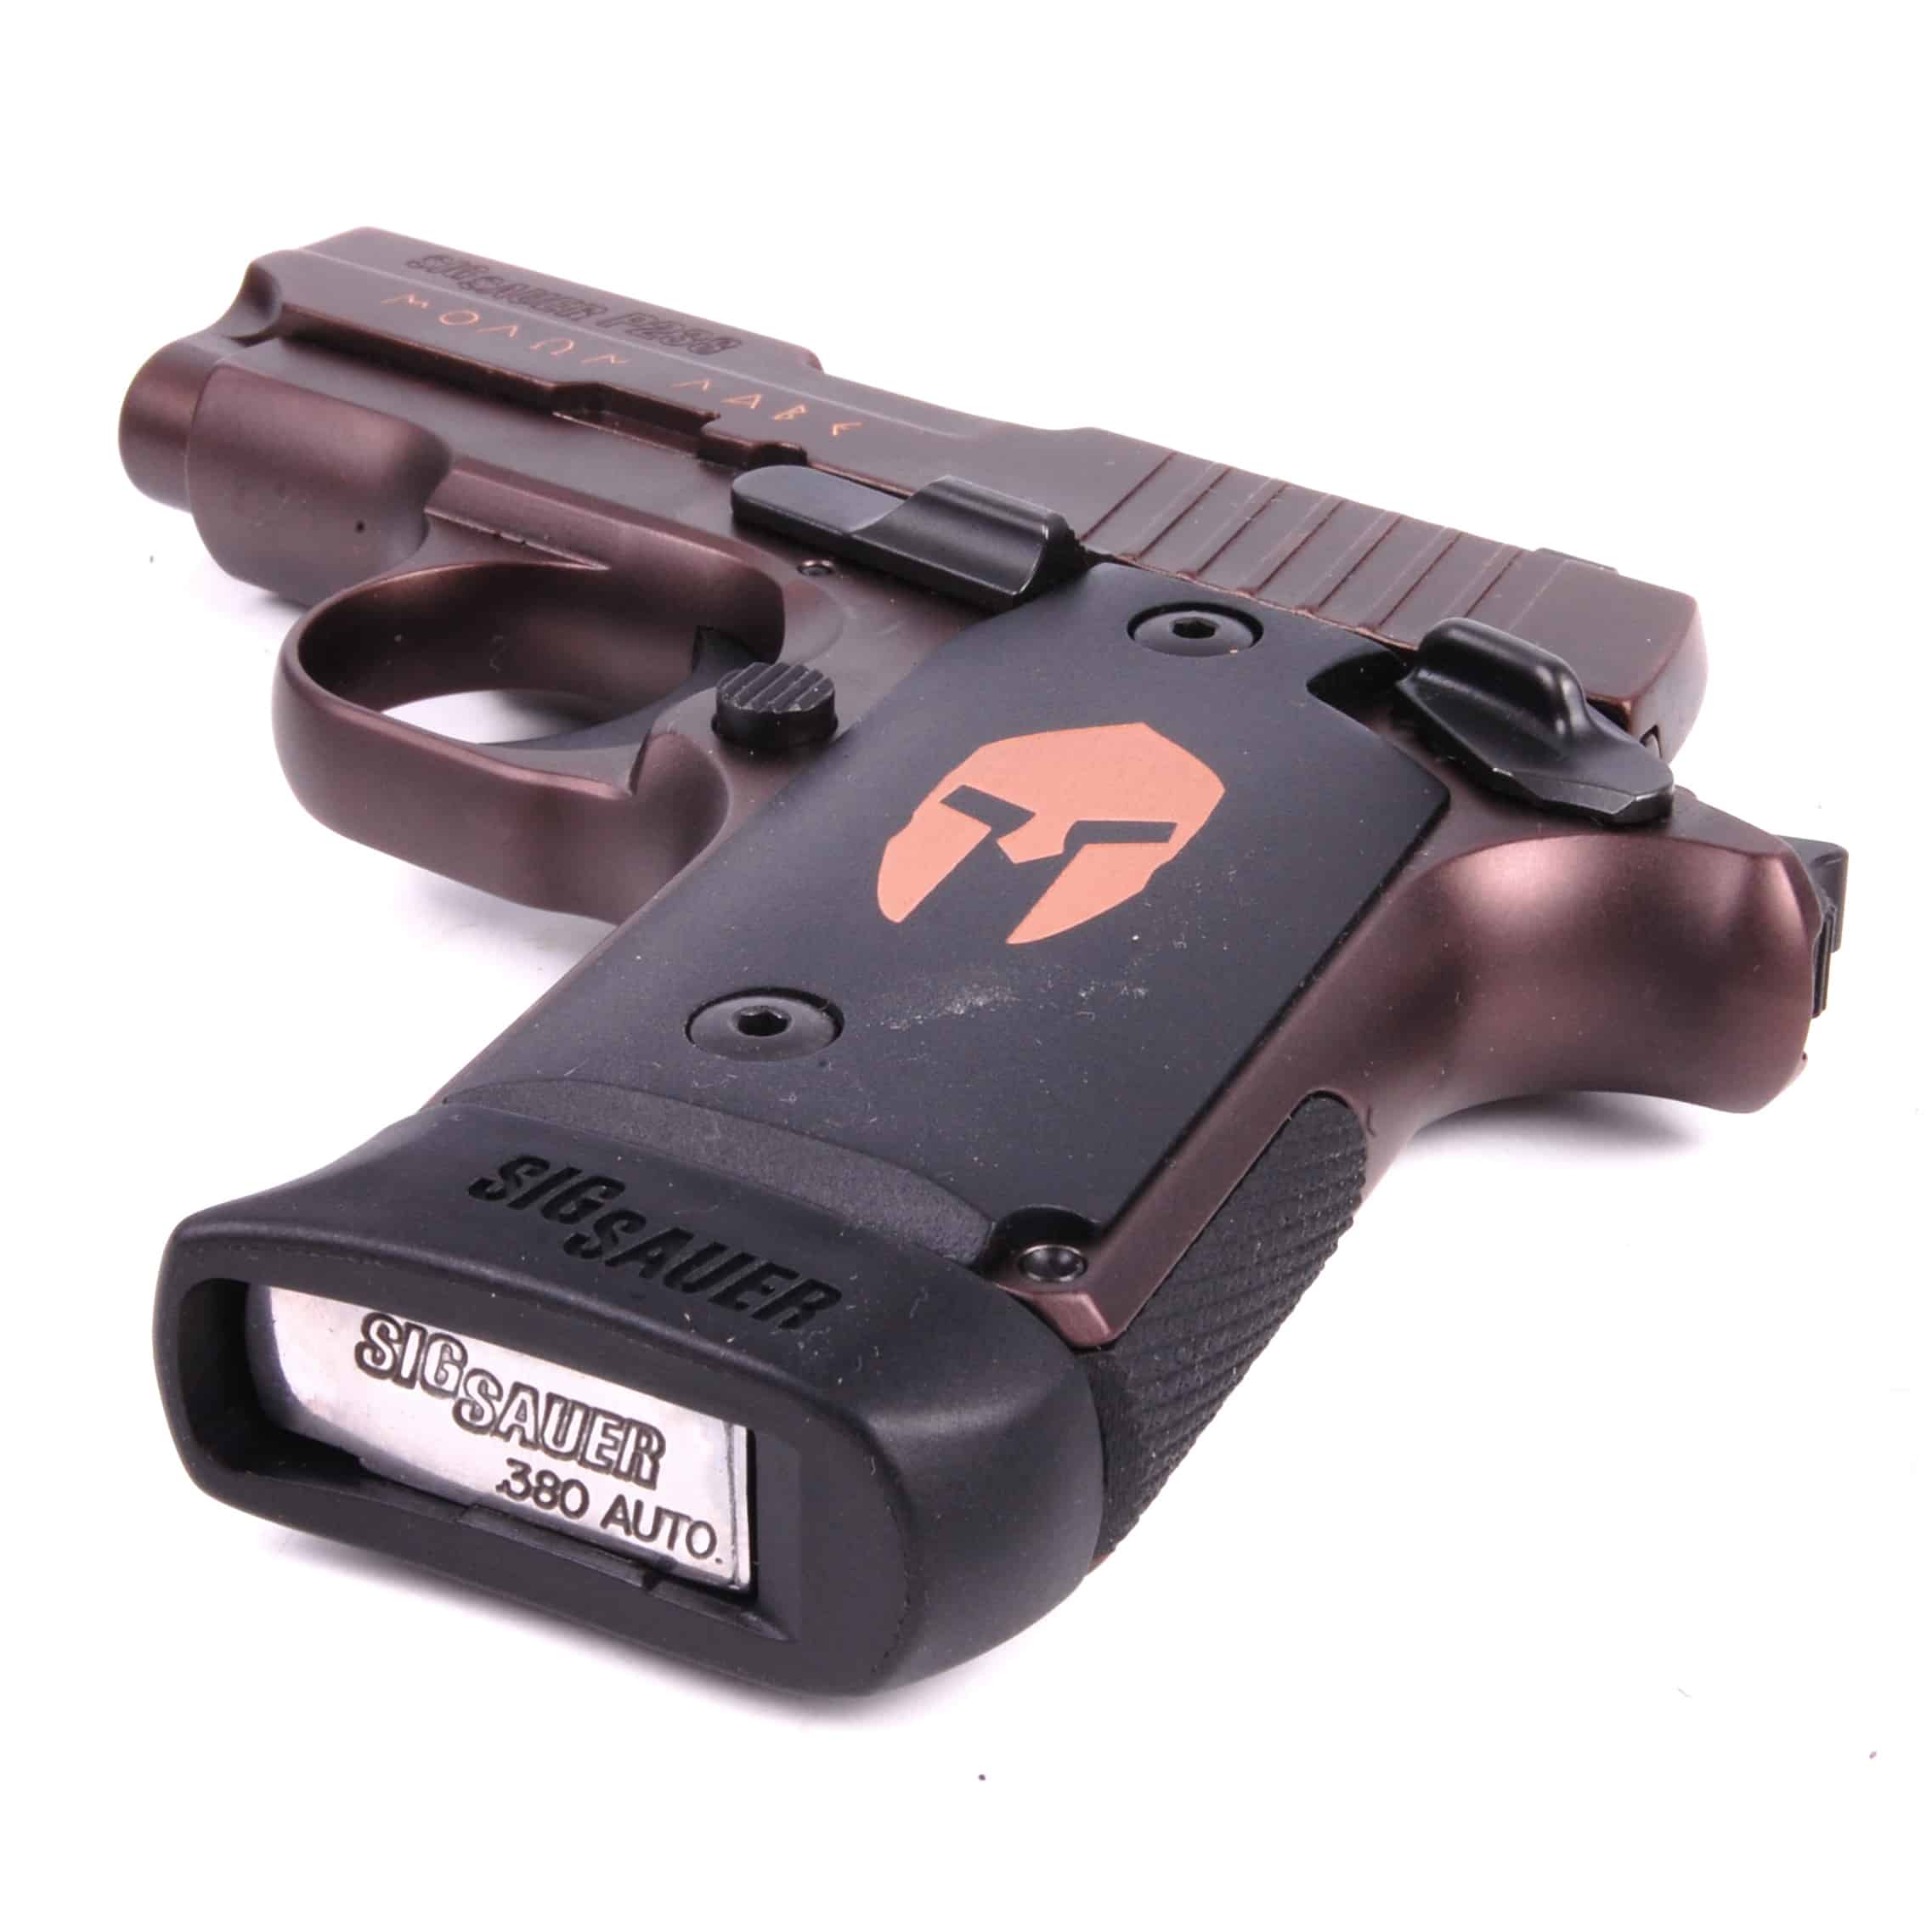 Exclusive: Holstering the Sig Sauer P238 Spartan.